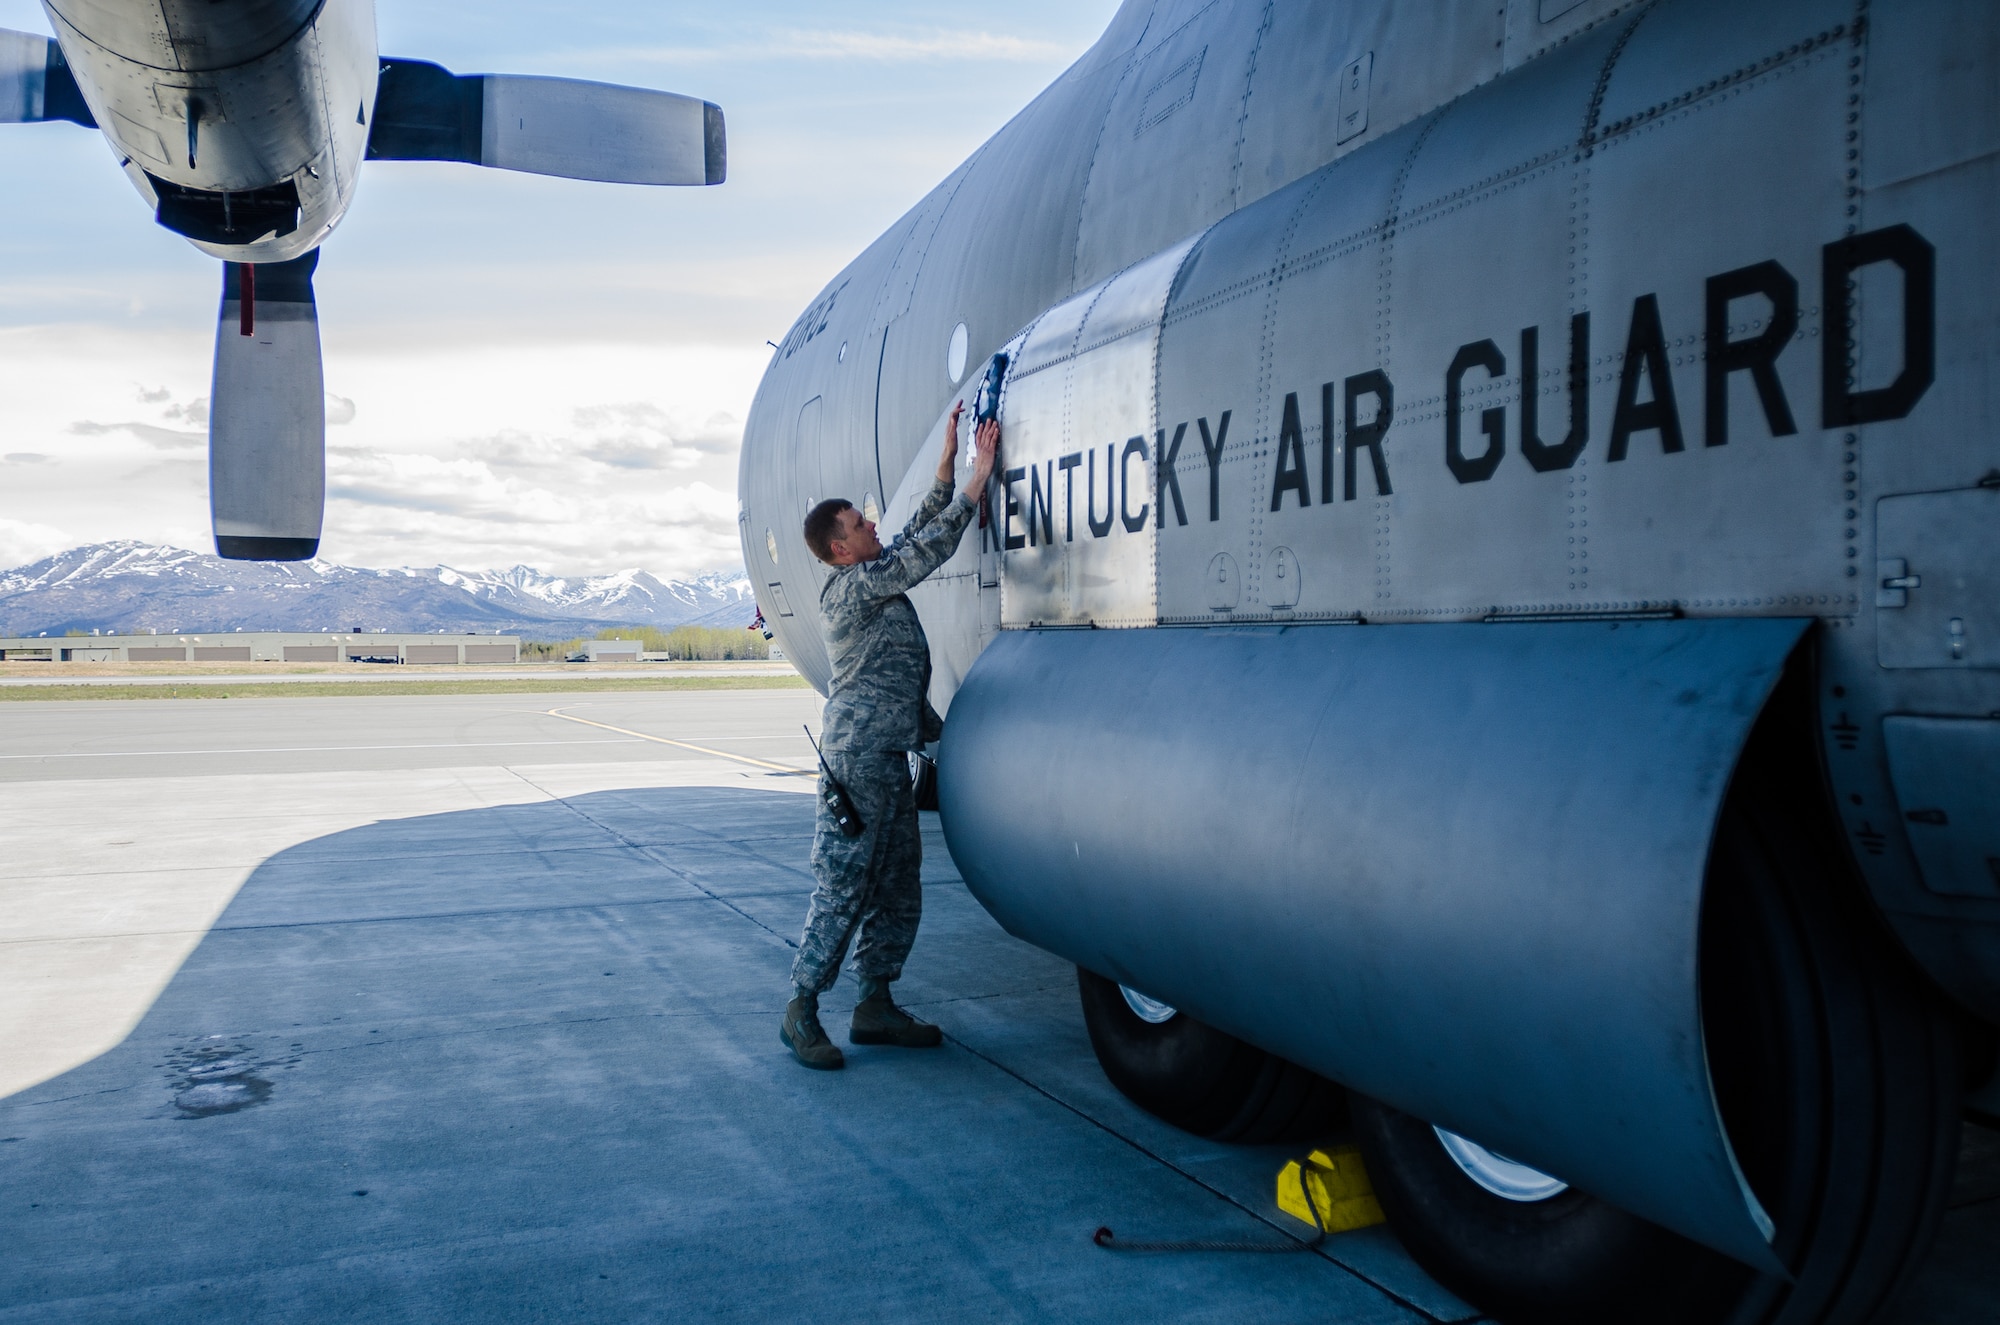 Master Sgt. Lonie Gipson, an expediter for the 123rd Aircraft Maintenance Squadron, installs an auxiliary power unit cover on a Kentucky Air National Guard C-130 Hercules prior to flight operations at Joint Base Elmendorf-Richardson, Alaska, on May 8, 2014. More than 100 Airmen from the Kentucky Air National Guard’s 123rd Airlift Wing are currently deployed to participate in Red Flag-Alaska. (U.S. Air National Guard photo by Master Sgt. Phil Speck)